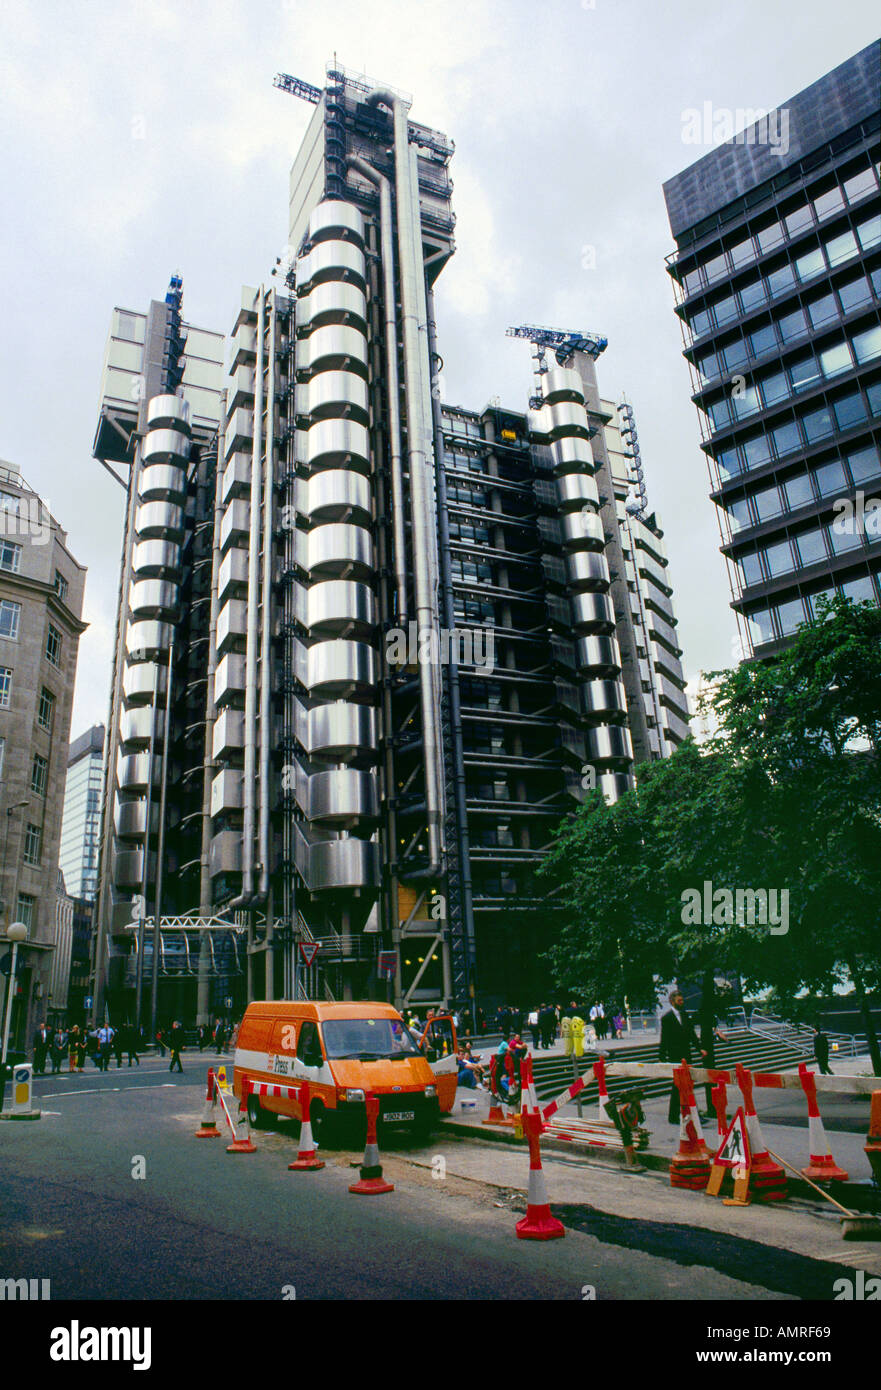 London England Lloyd's Building with Bowellism Architecture all Building Services are on the Exterior  - Architect Richard Rogers Stock Photo